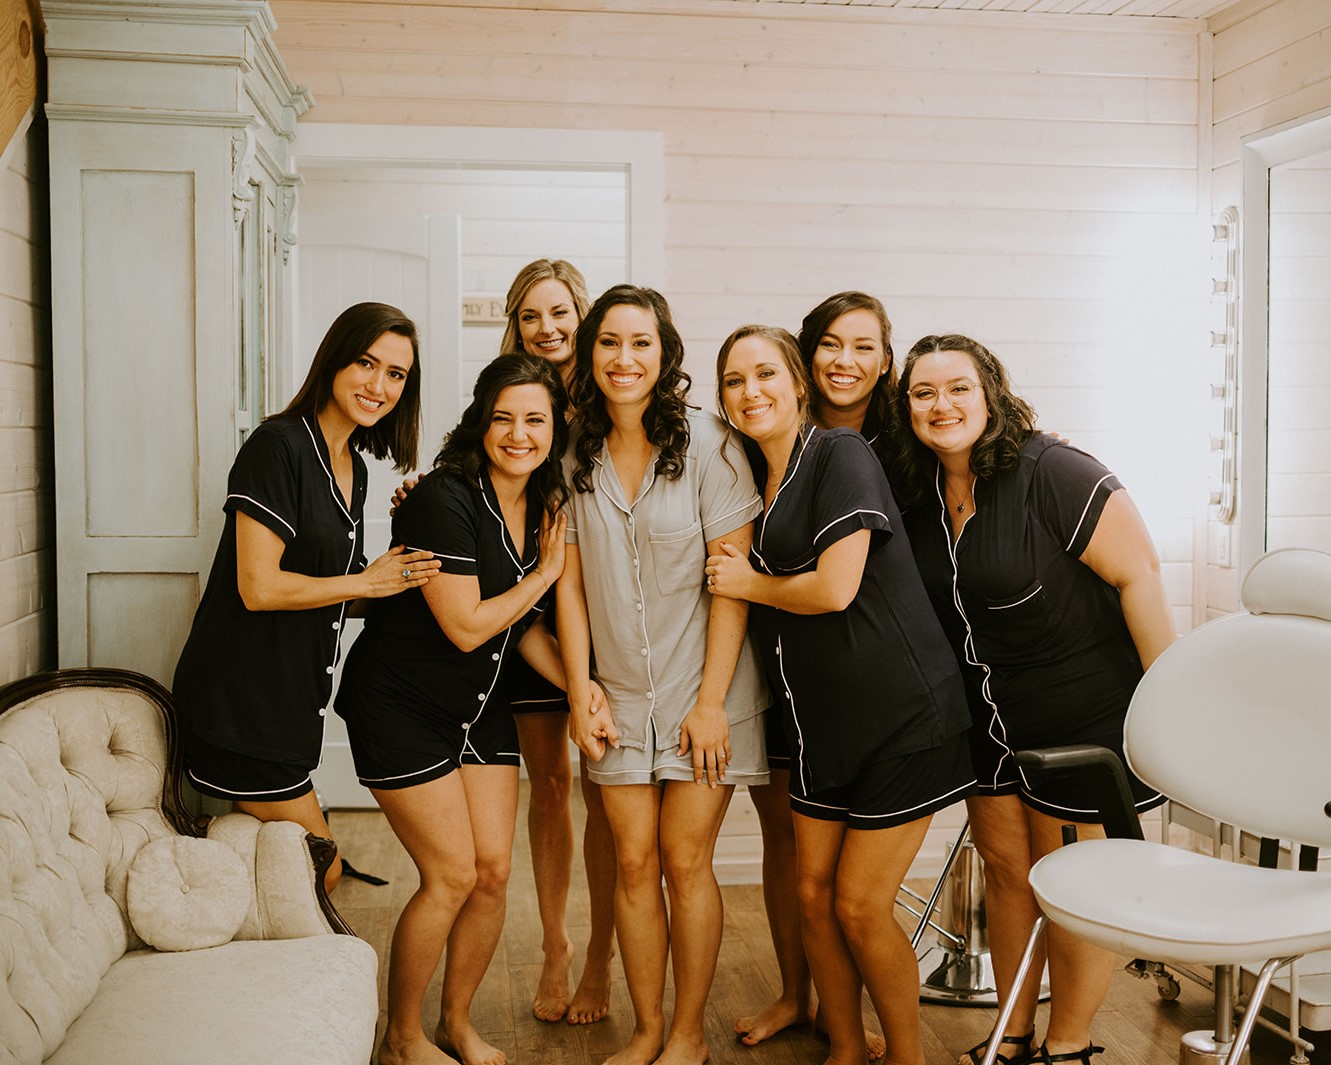 A bride and her bridesmaids in the bridal suite at The Vineyard Hall - A Rustic Wedding Venue